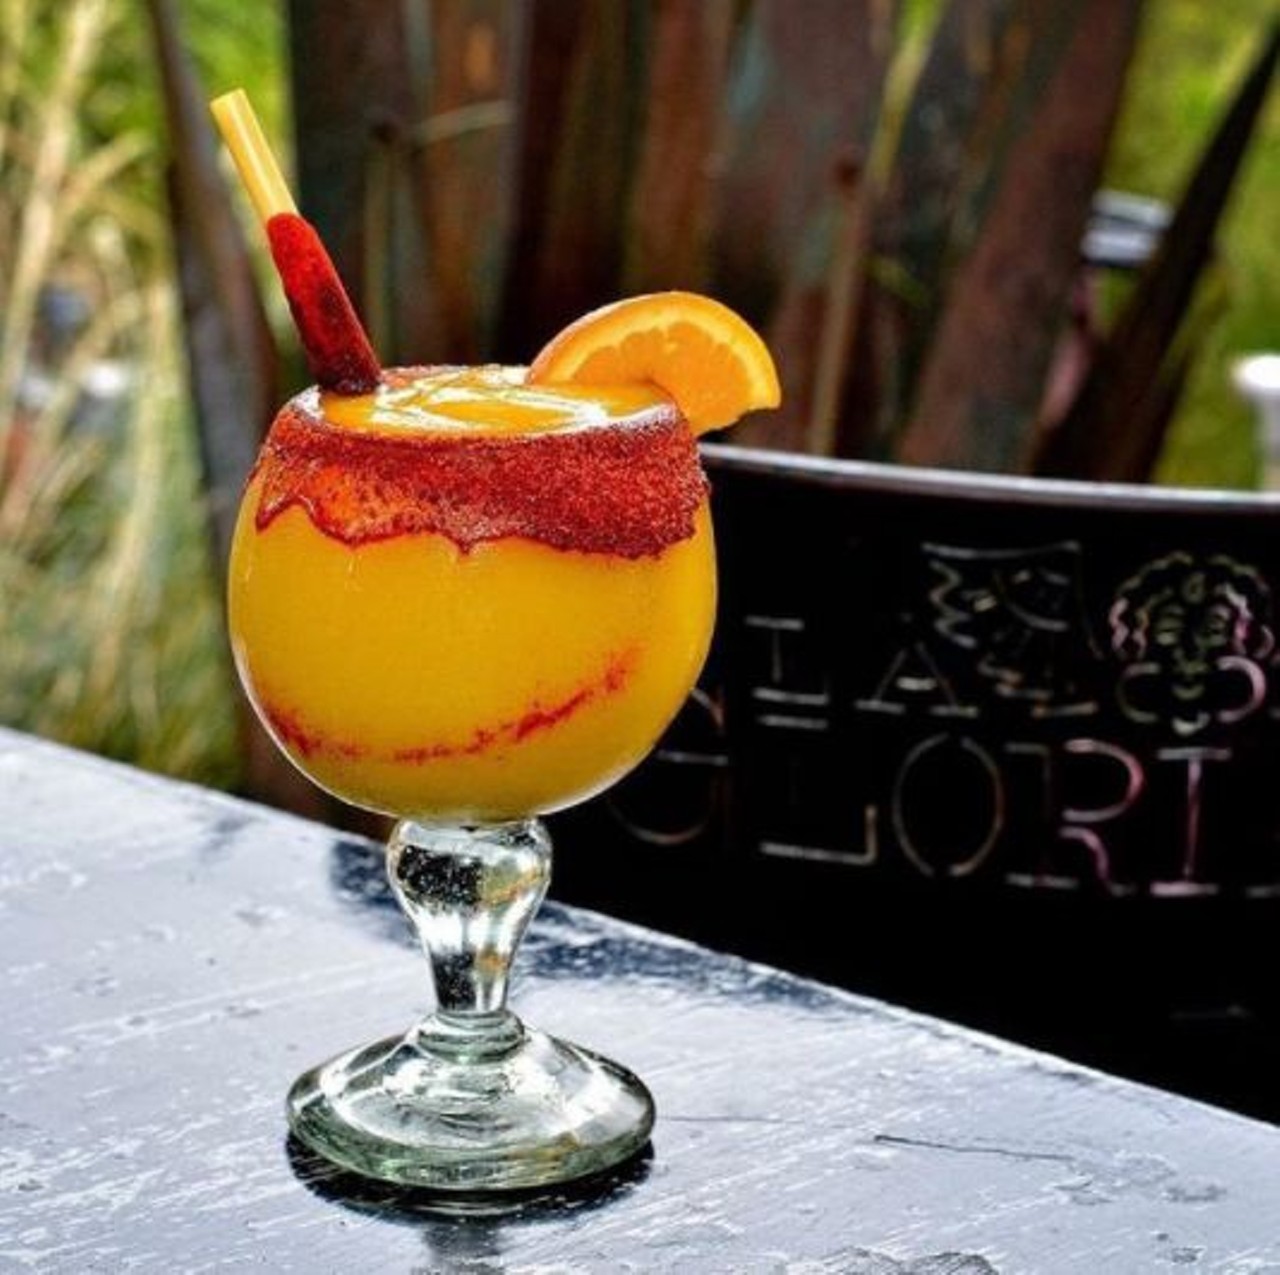 La Gloria
100 E Grayson St., (210) 267-9040 
Our winner for the 2016 award for &#147;Best Margaritas&#148; in San Antonio, La Gloria serves up great frozen and on the rocks margaritas.
Photo via Instagram, historicpearl